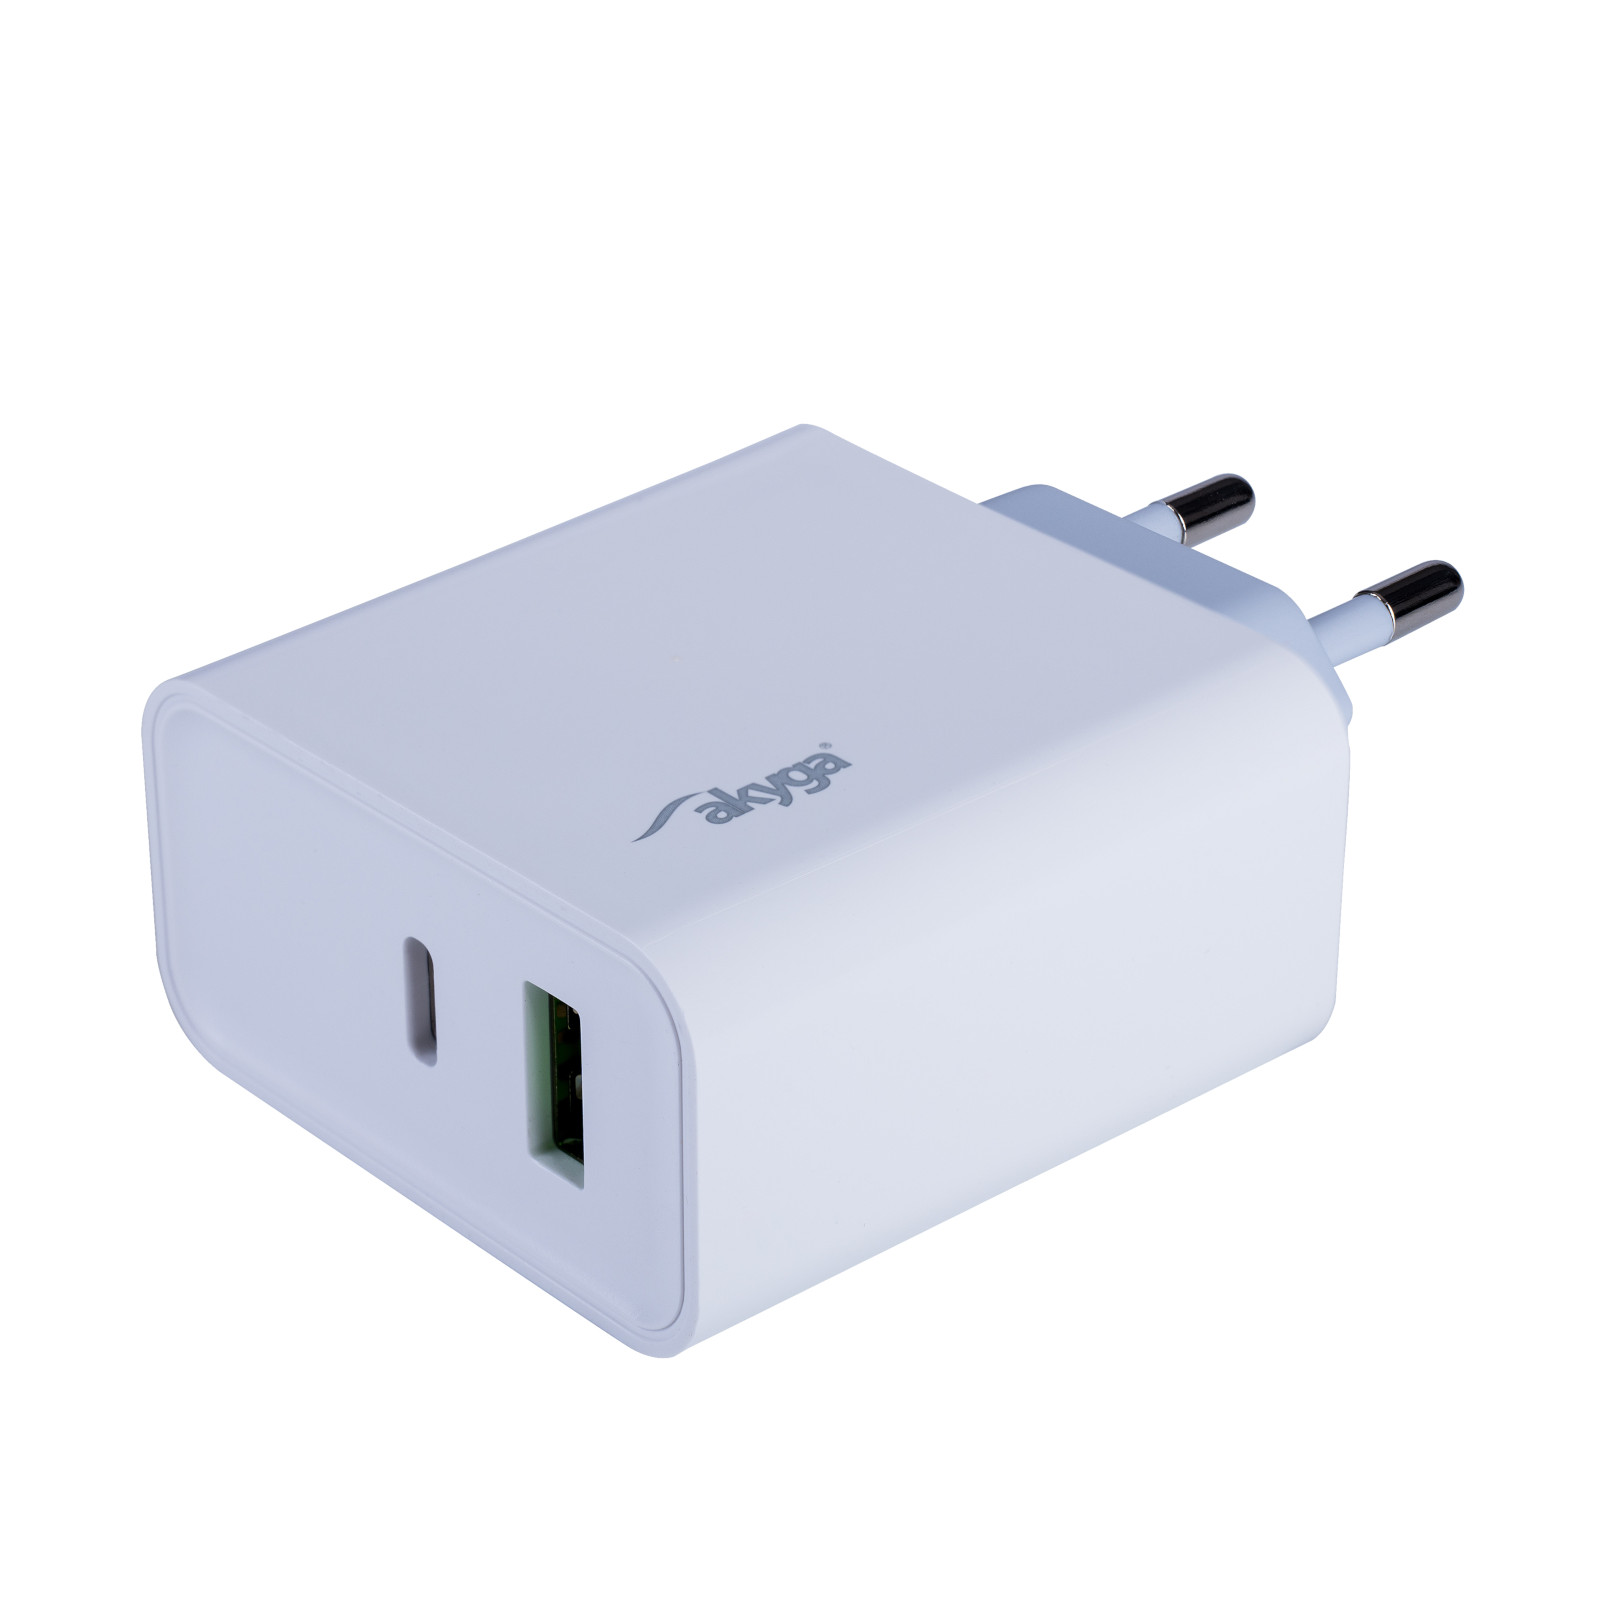 Main image USB Charger AK-CH-14 USB-A + USB-C PD 5-20 V / max. 3A 45W Quick Charge 3.0